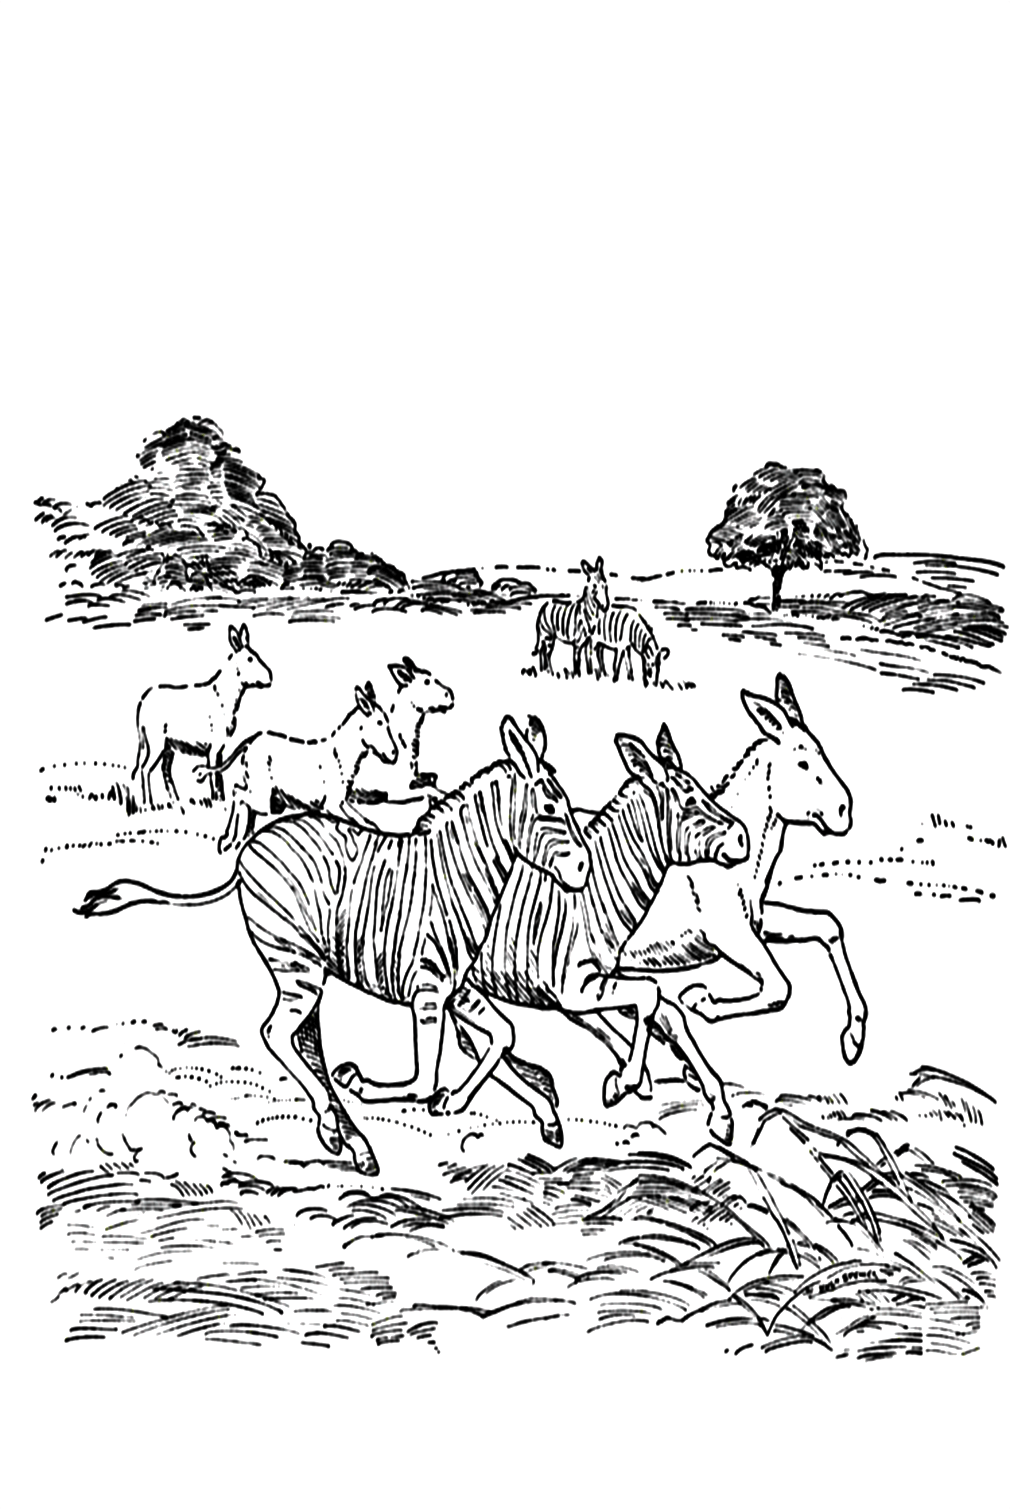 Zebra And The Horses Run Together Coloring Pages